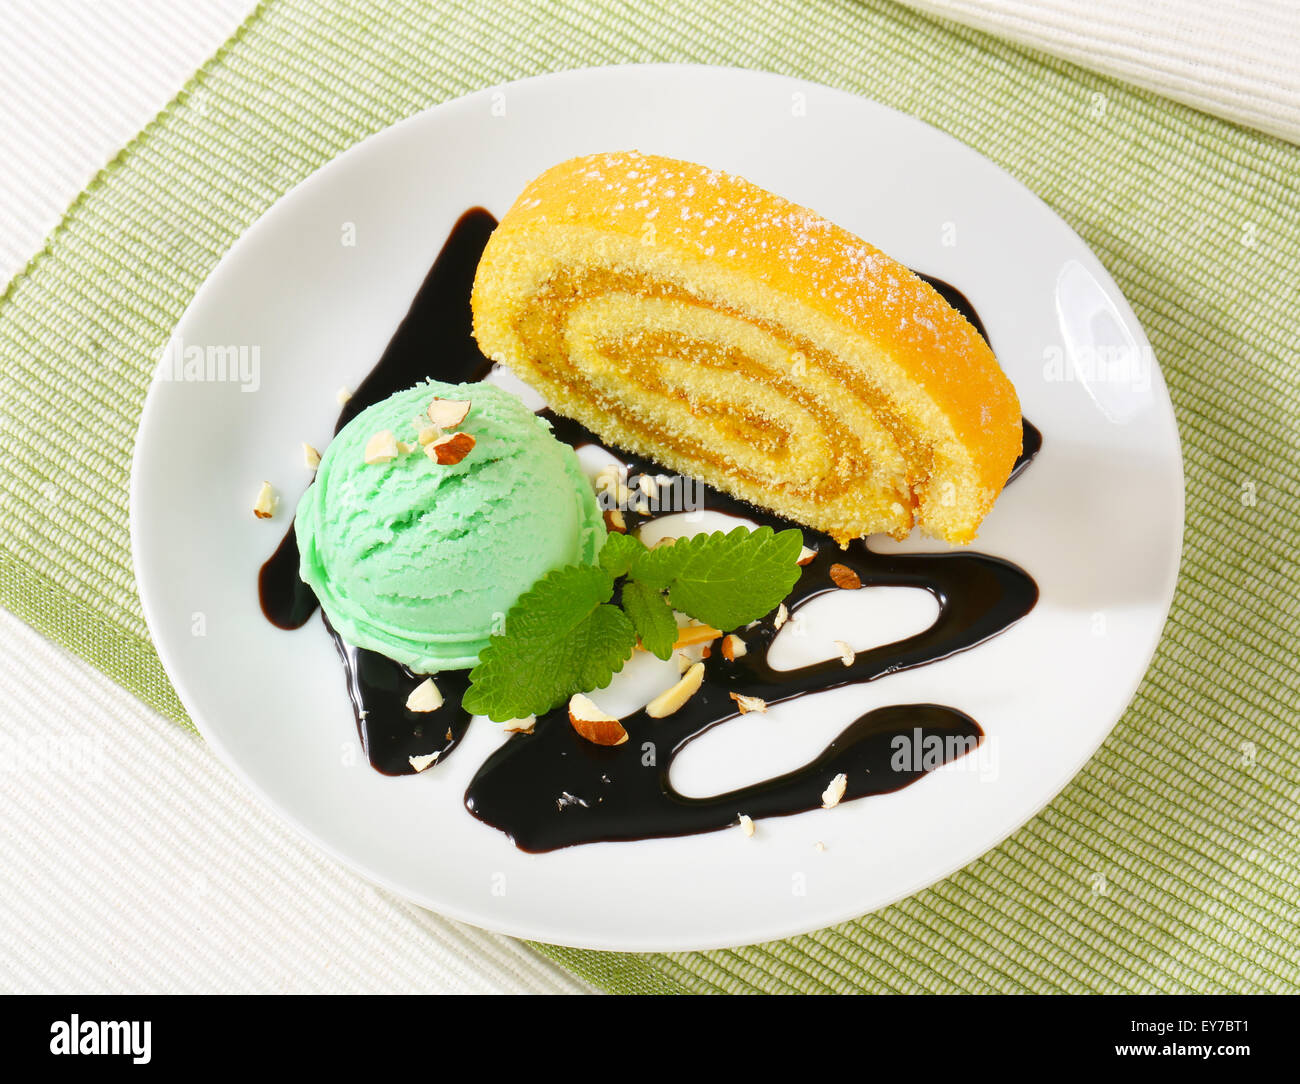 Slice of Swiss roll cake with green sherbet and chocolate sauce Stock Photo